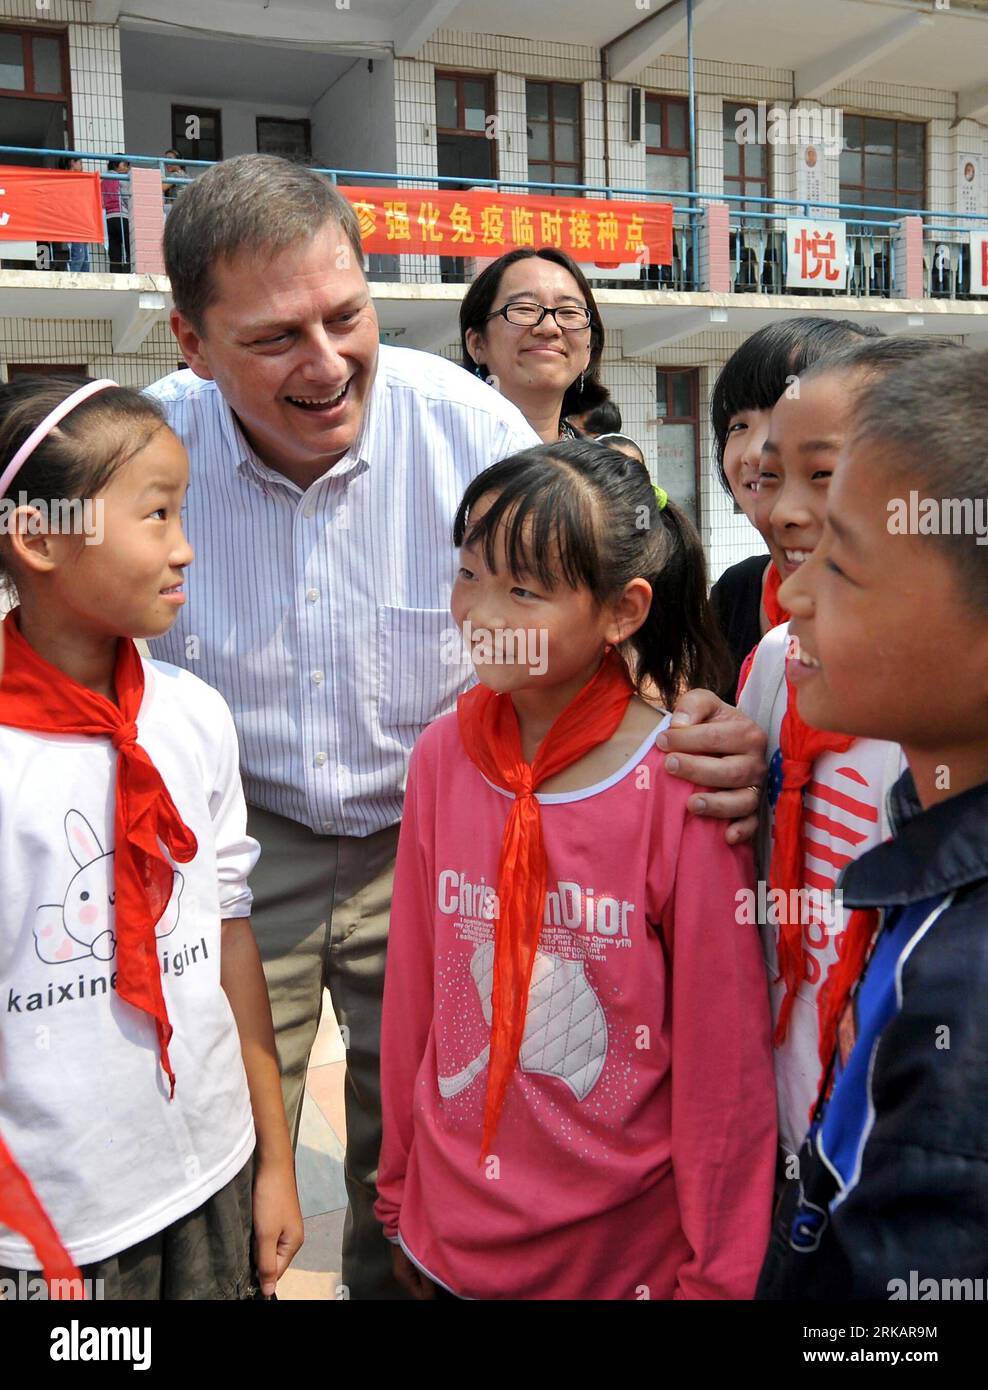 Bildnummer: 54418598  Datum: 11.09.2010  Copyright: imago/Xinhua (100911) -- ZHENGZHOU, Sept. 11, 2010 (Xinhua) -- David Sniadack, an official with World Health Organization (WHO), talks with students at a primary school in Kaifeng, central China s Henan Province, Sept. 11, 2010. David Sniadack, accompanied by staffs of China s Health Ministry and Center for Disease Control and Prevention, visited Henan Saturday for supervision of measles vaccination program. China began a large-scale measles vaccination program for an estimated 100 million children Saturday. (Xinhua/Wang Song) (wyo) CHINA-MEA Stock Photo